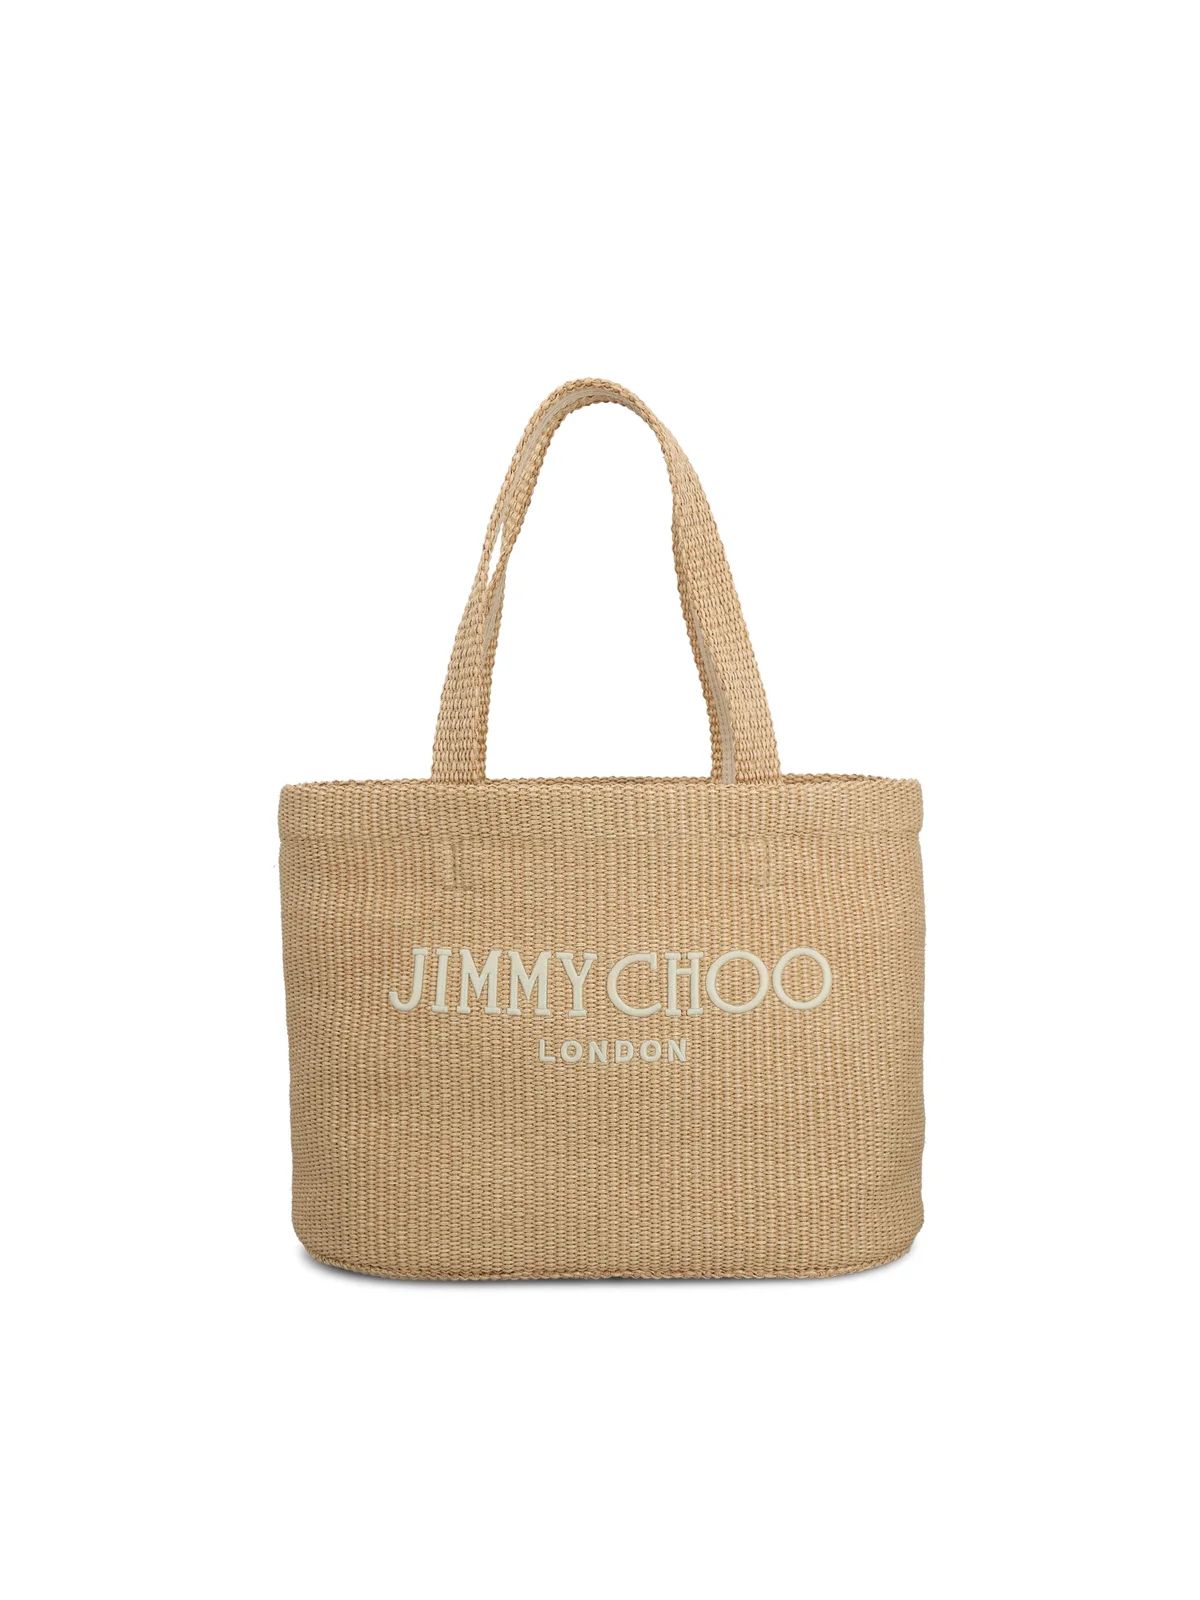 Jimmy Choo Logo Embroidered Woven Tote Bag | Cettire Global